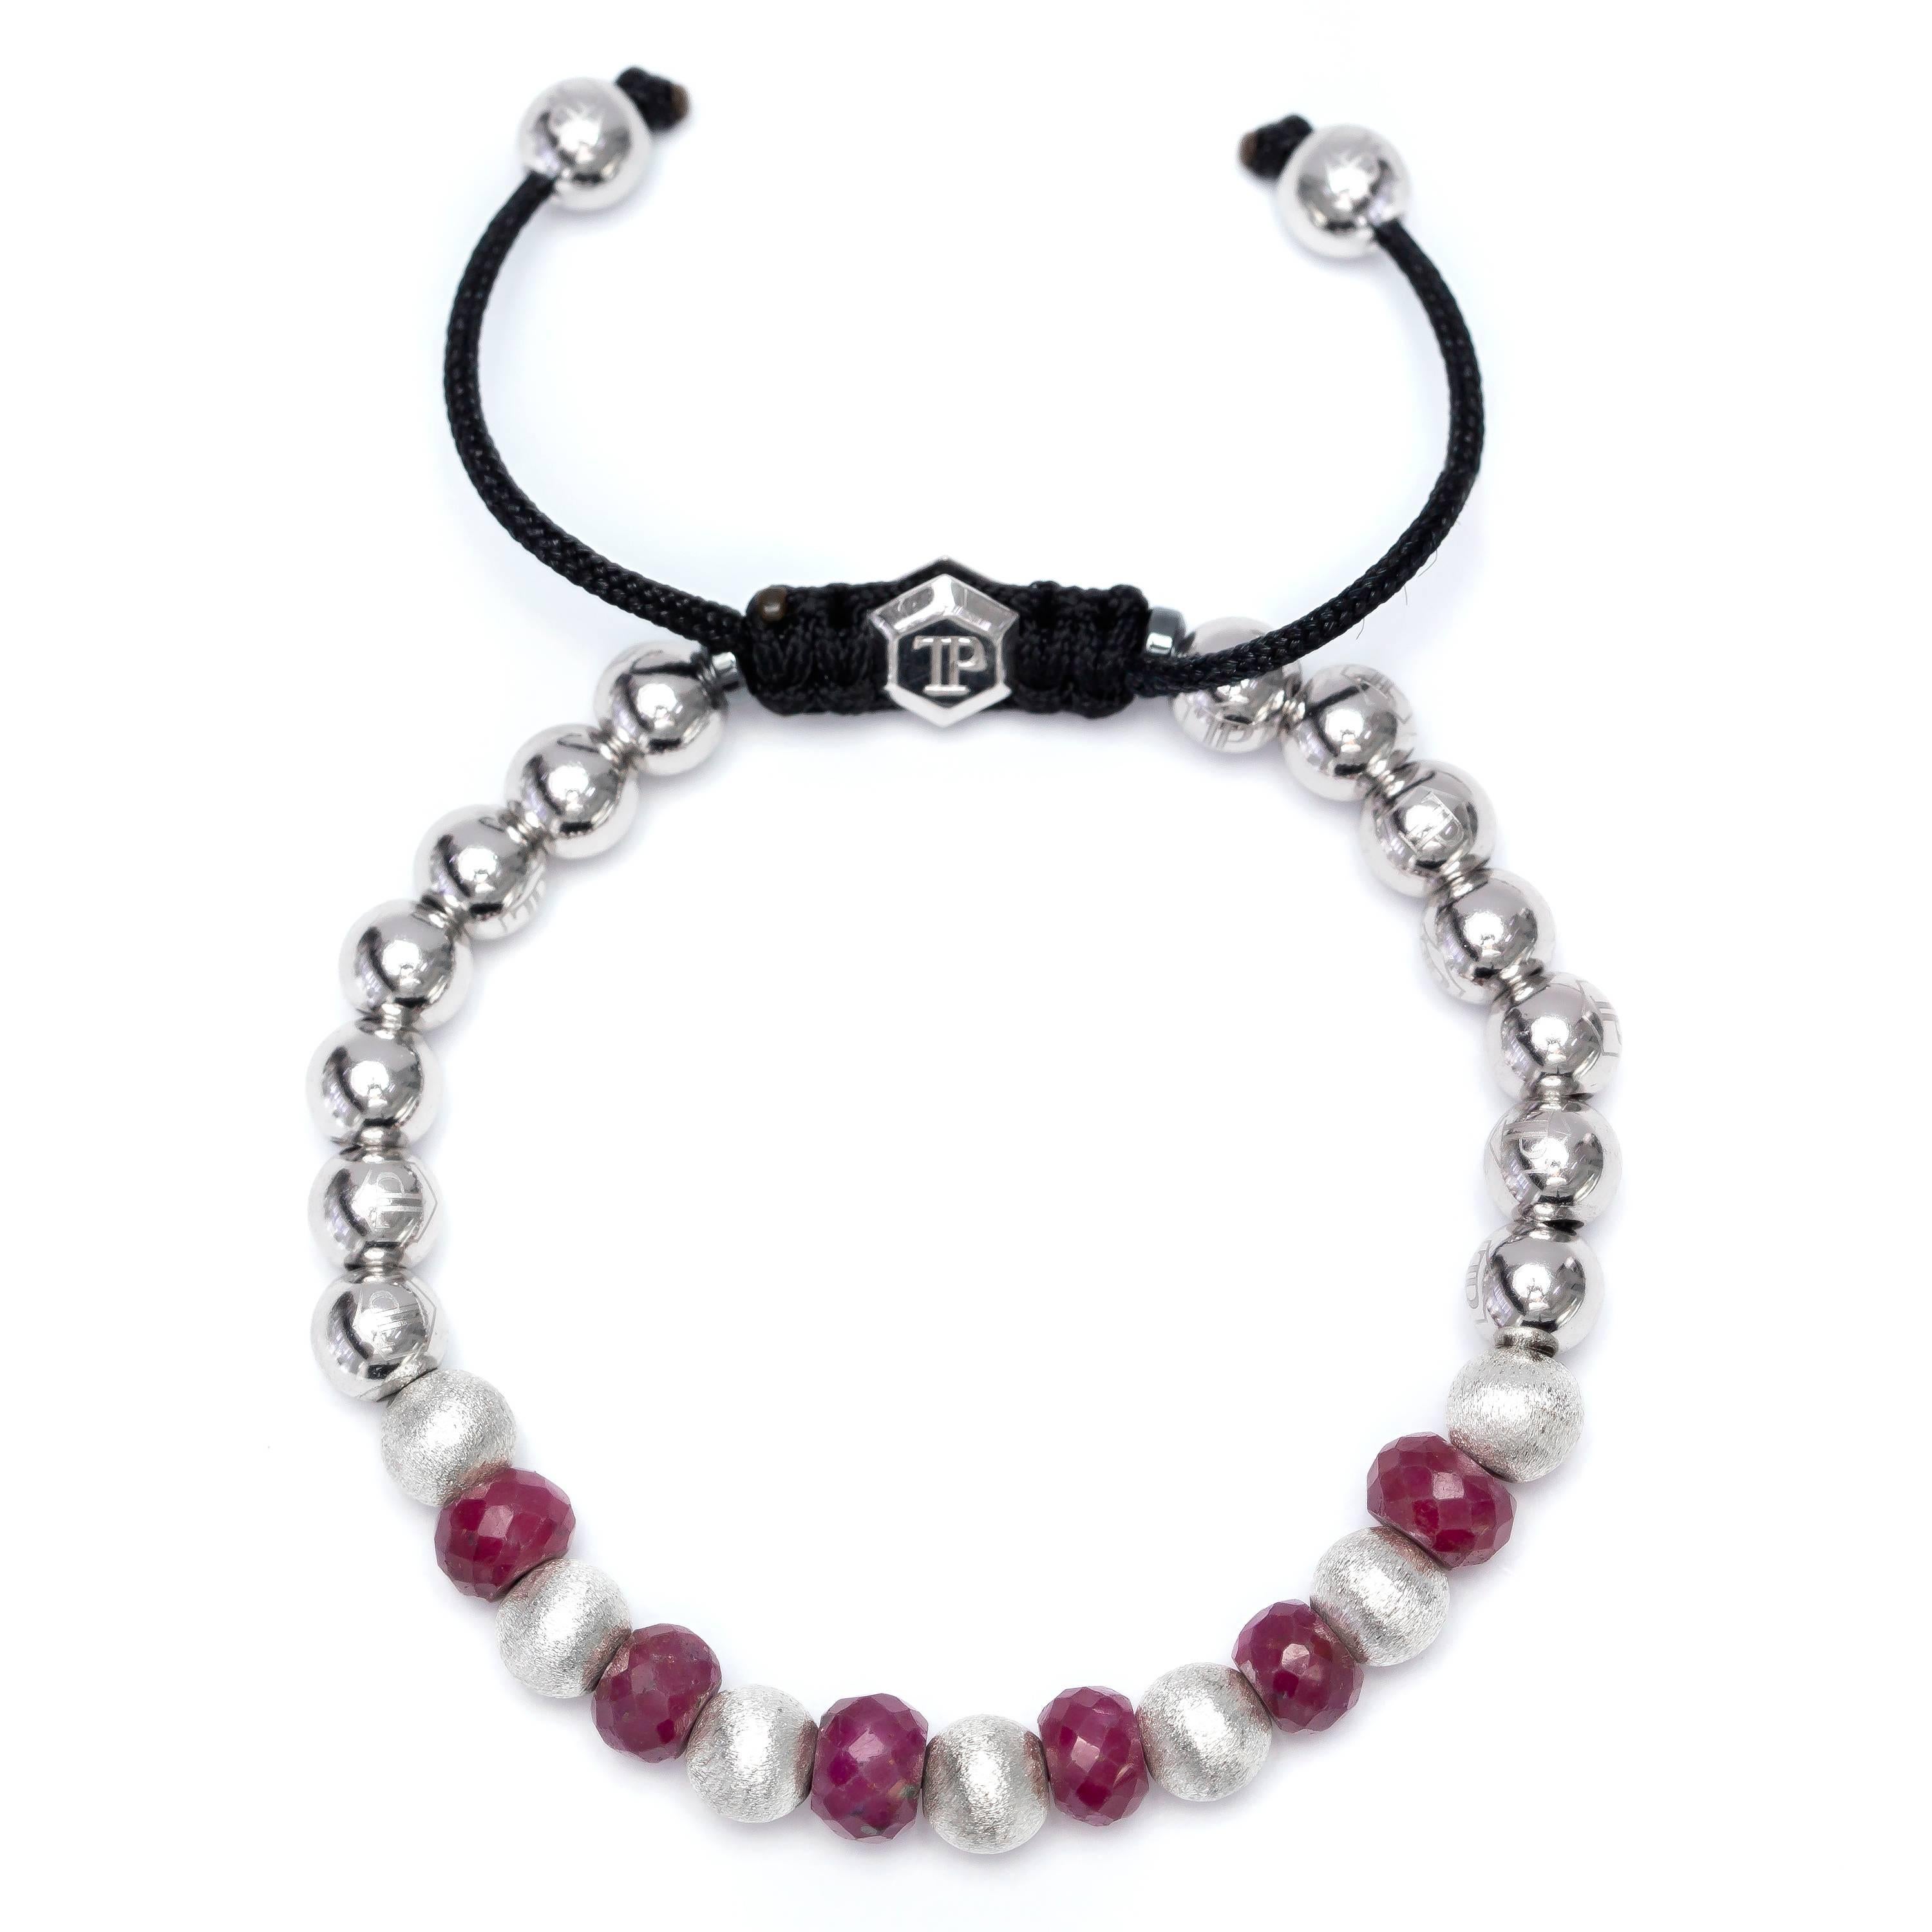 This 10.98 Ruby Stainless Steel and Silver beaded Macrame bracelet from The OriginalTresor Paris Audace Collection features 7 satin beads and 14 shiny Stainless Steel beads and two magnetite rings with a Silver Hexagon Logo. Size will fit from 7' to